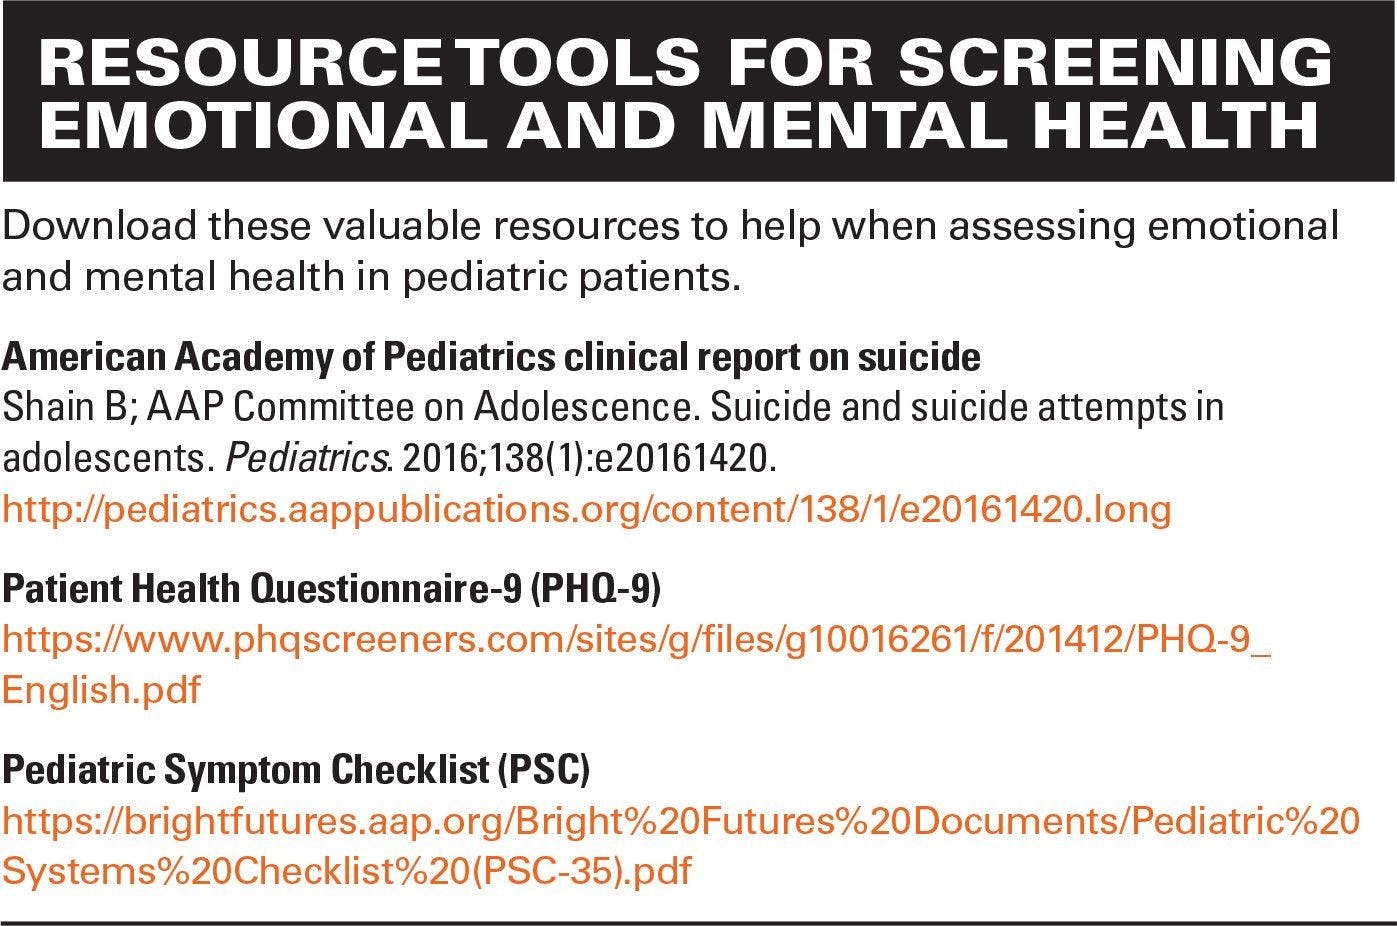 Resource tools for screening emotional and mental health